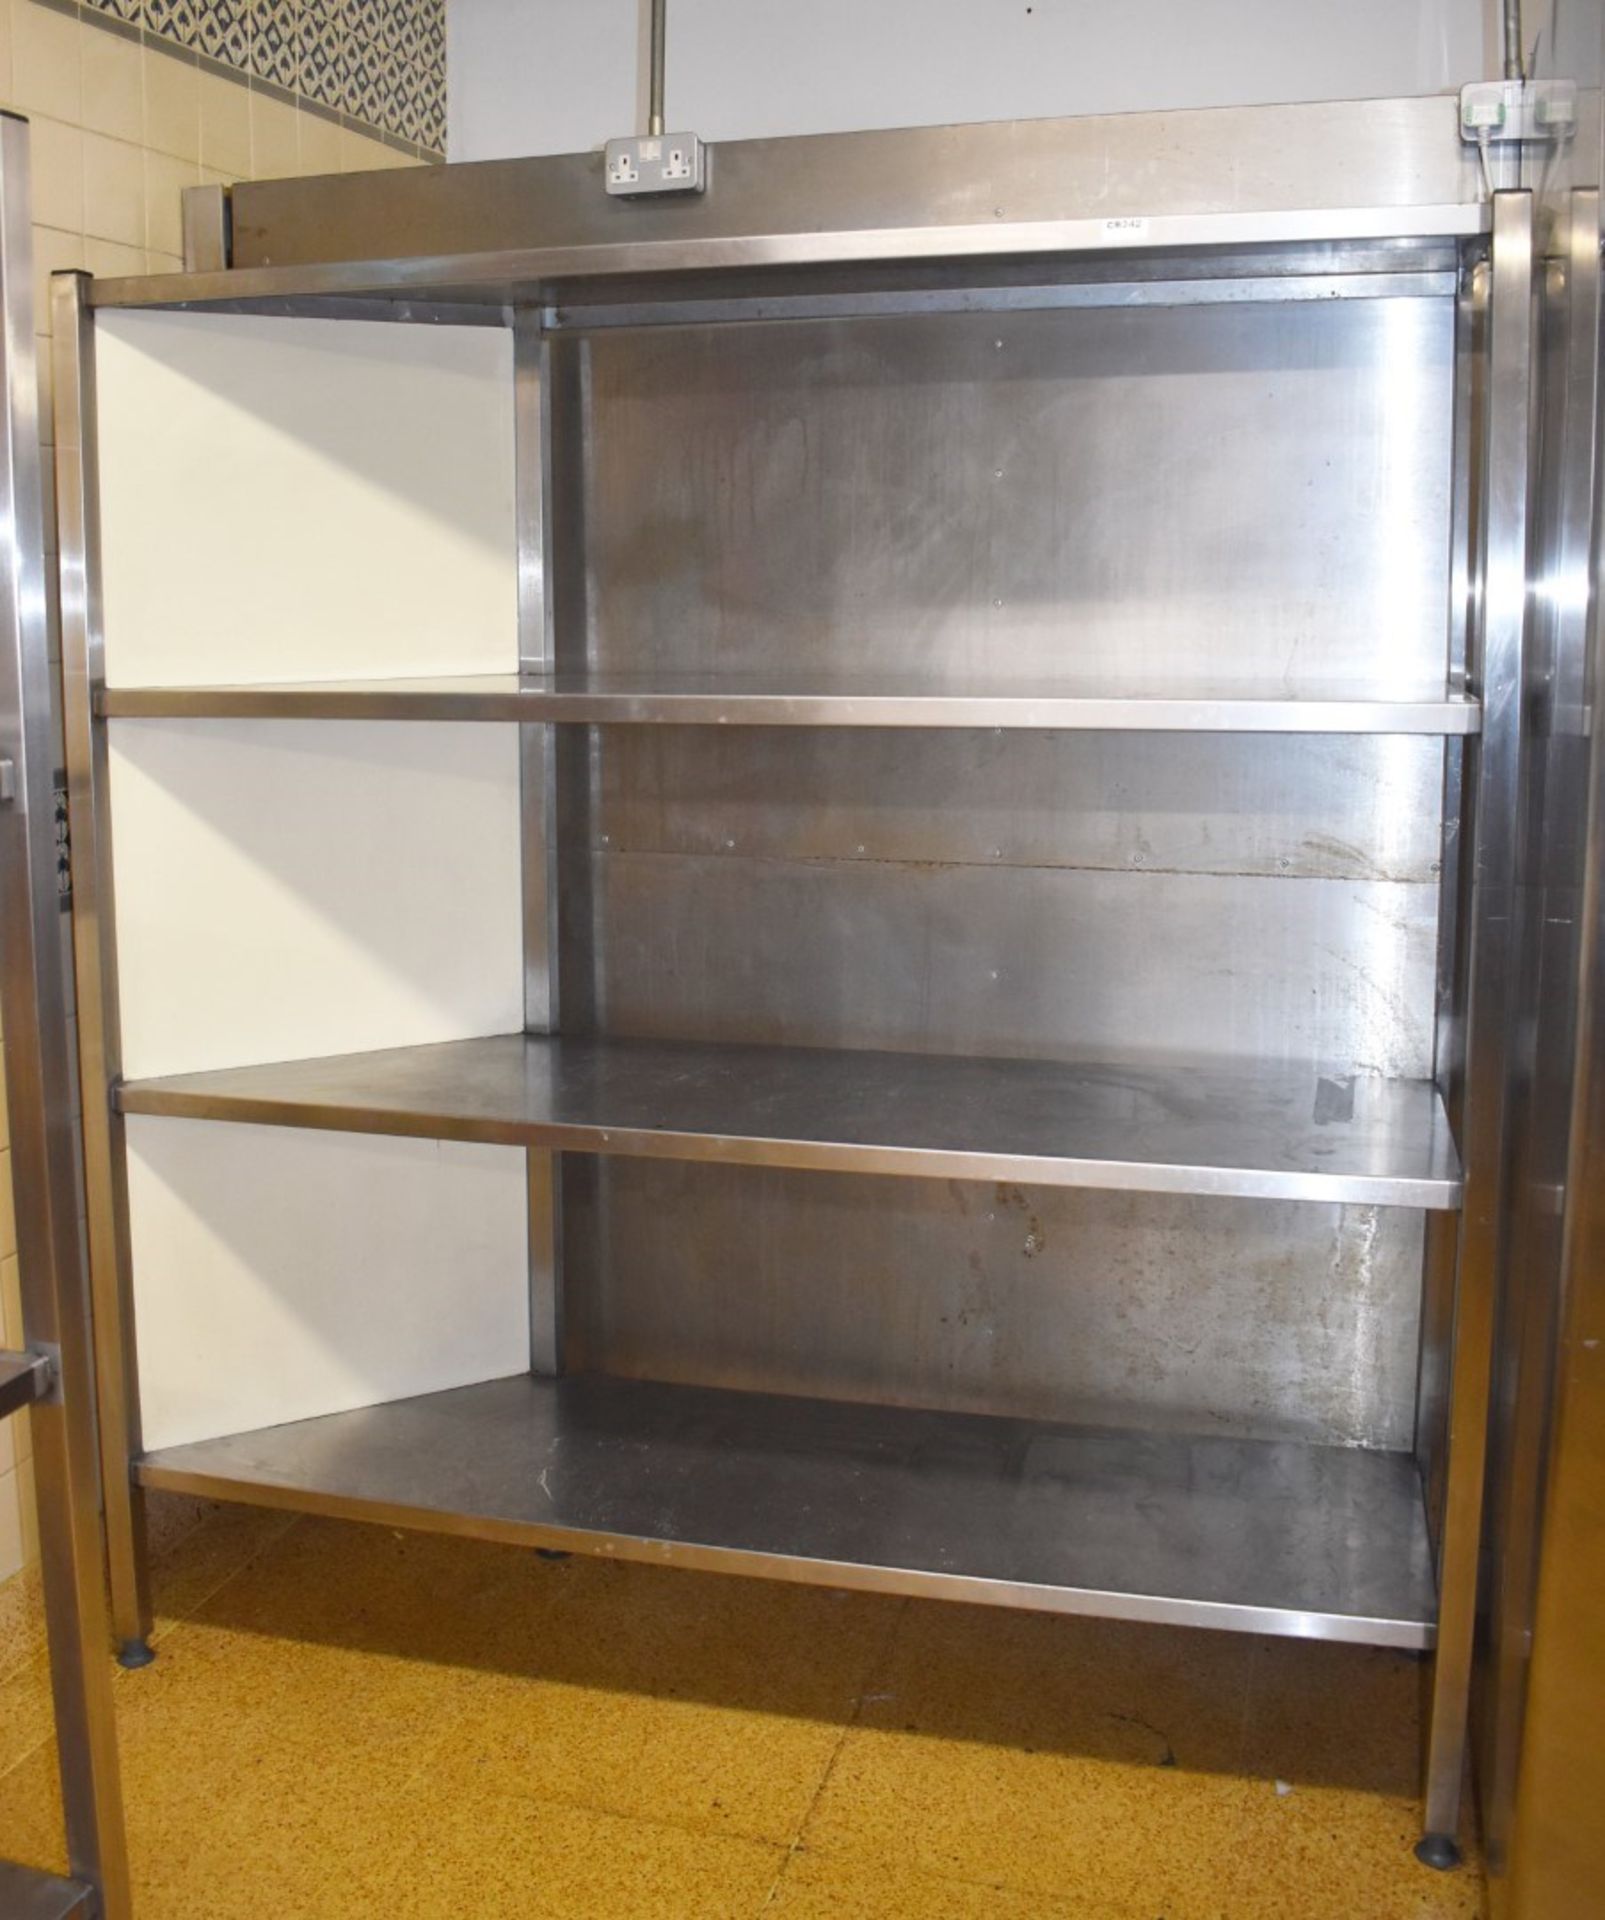 1 X THREE TIER STAINLESS STEEL STORAGE SHELF UNIT WITH SOLID BACK AND SIDES - Image 3 of 5